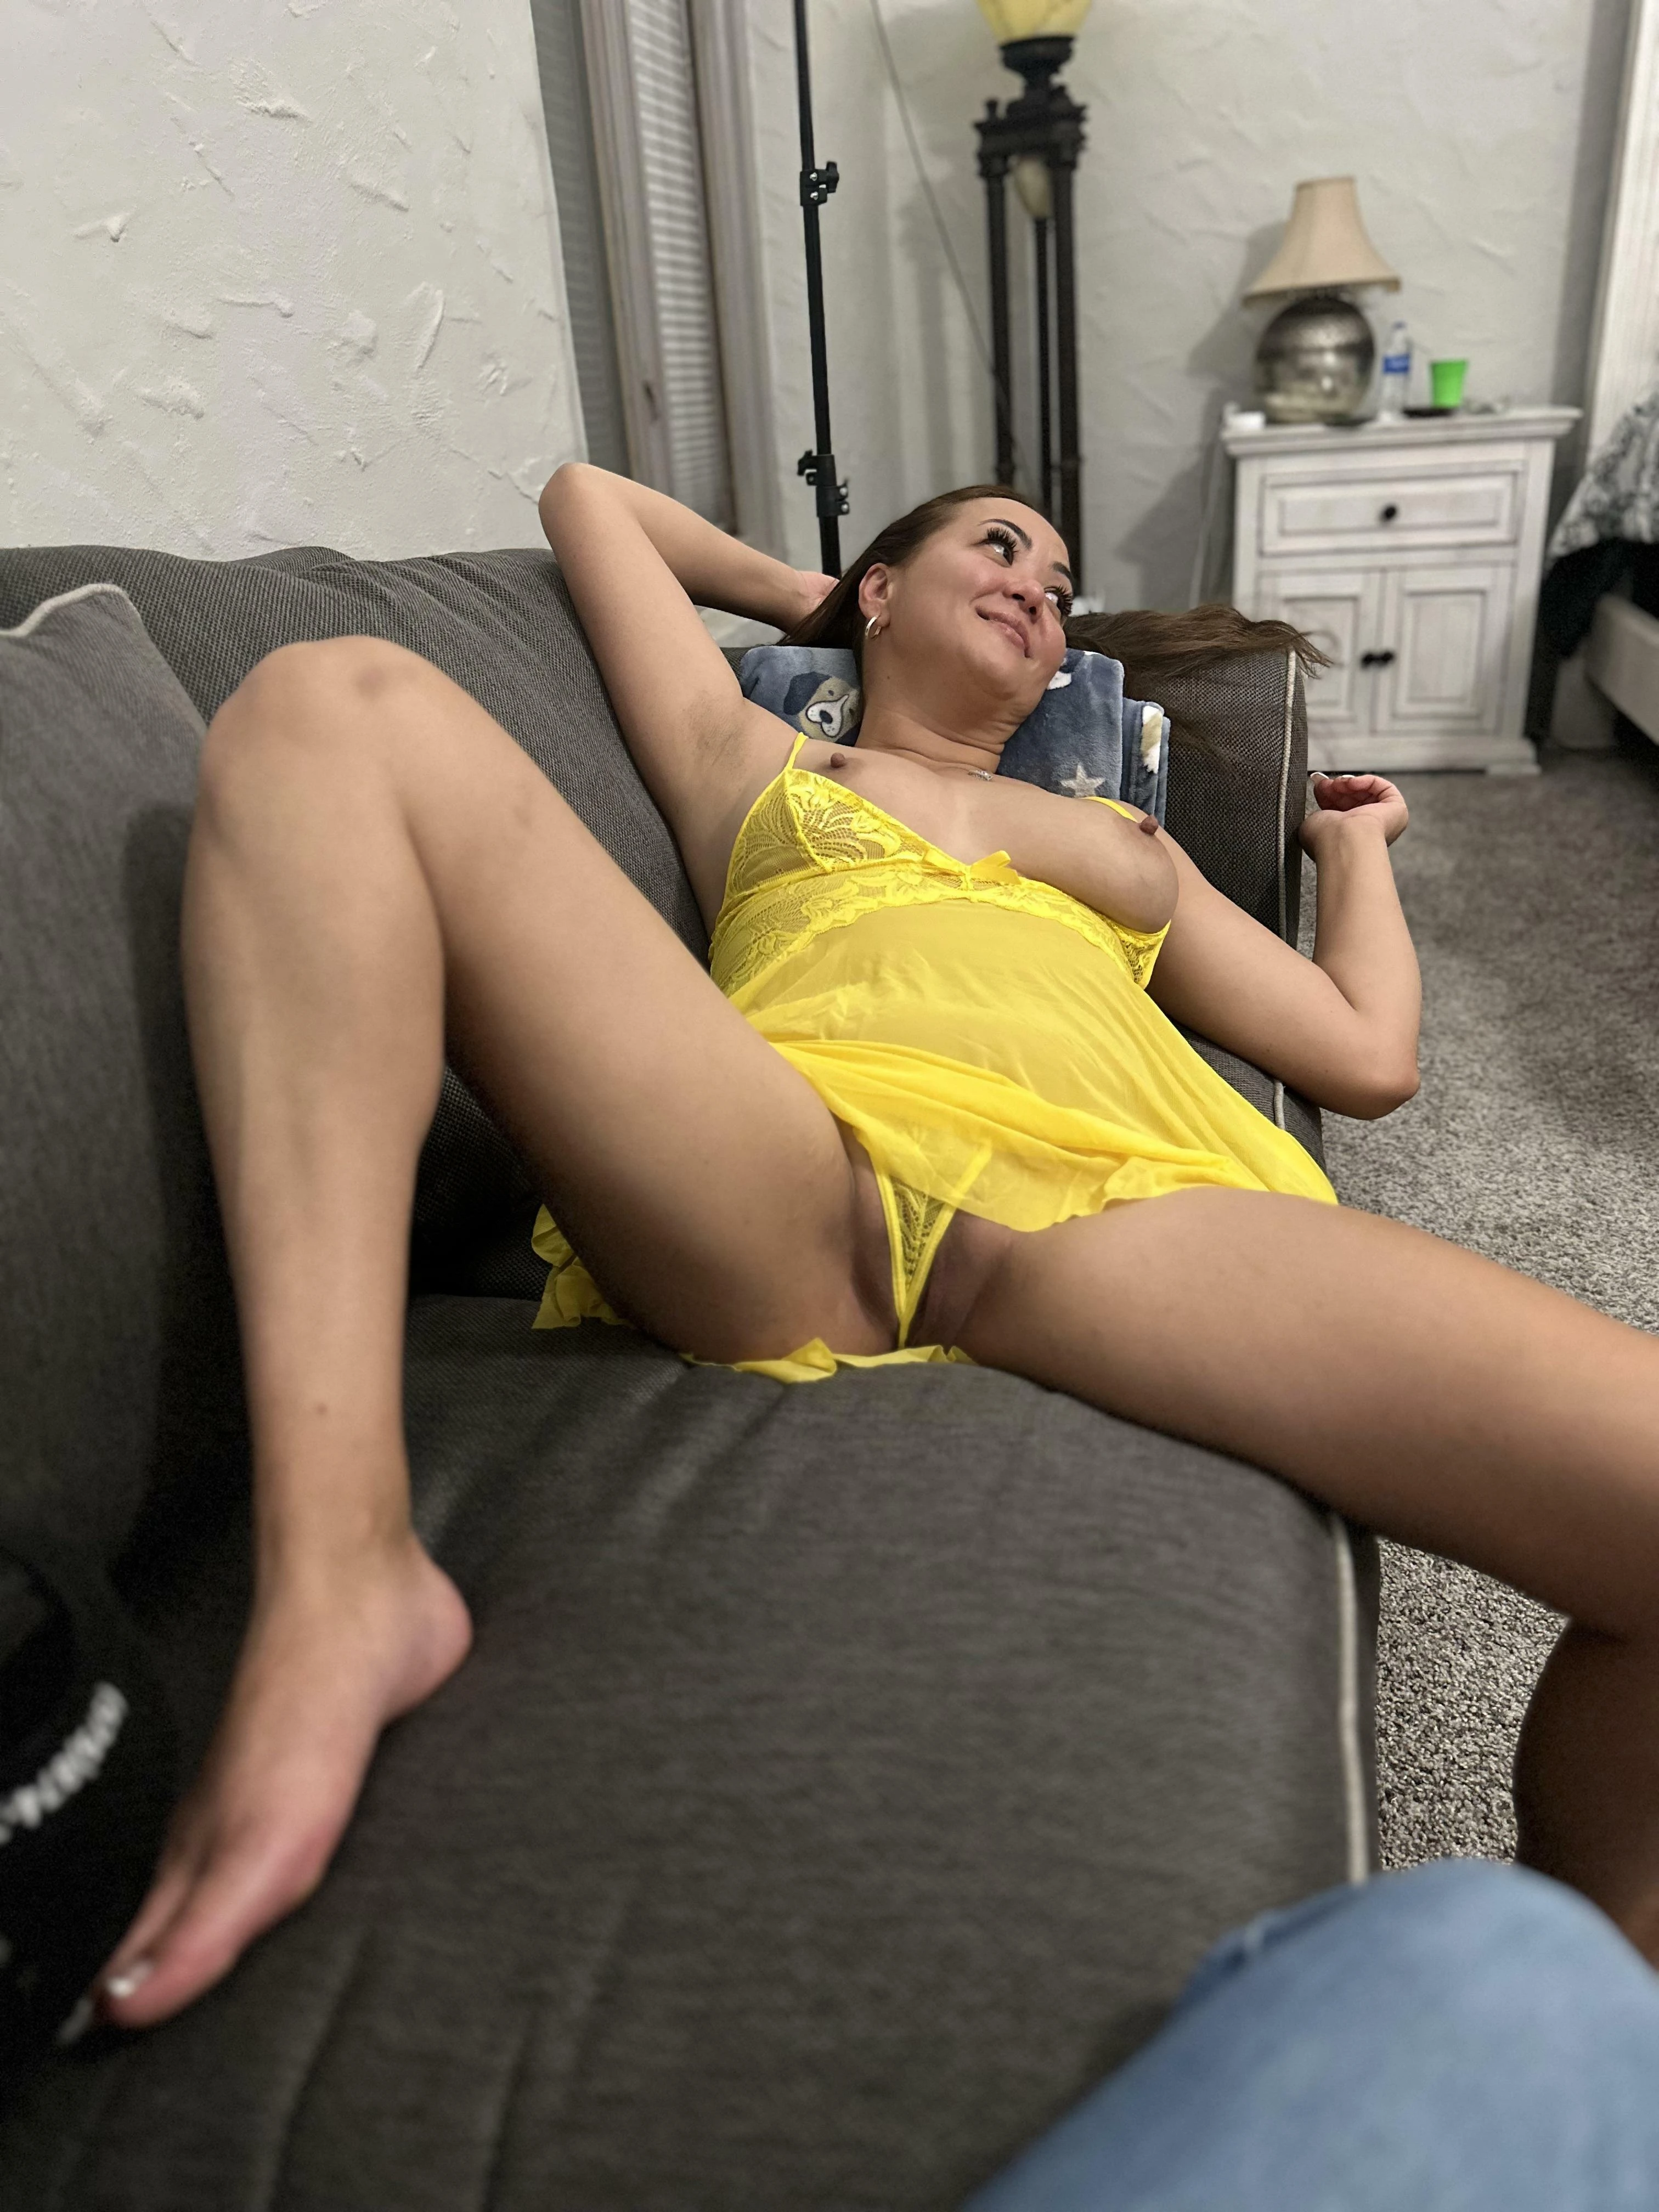 Would you fuck my wife if you saw her on the couch like this…